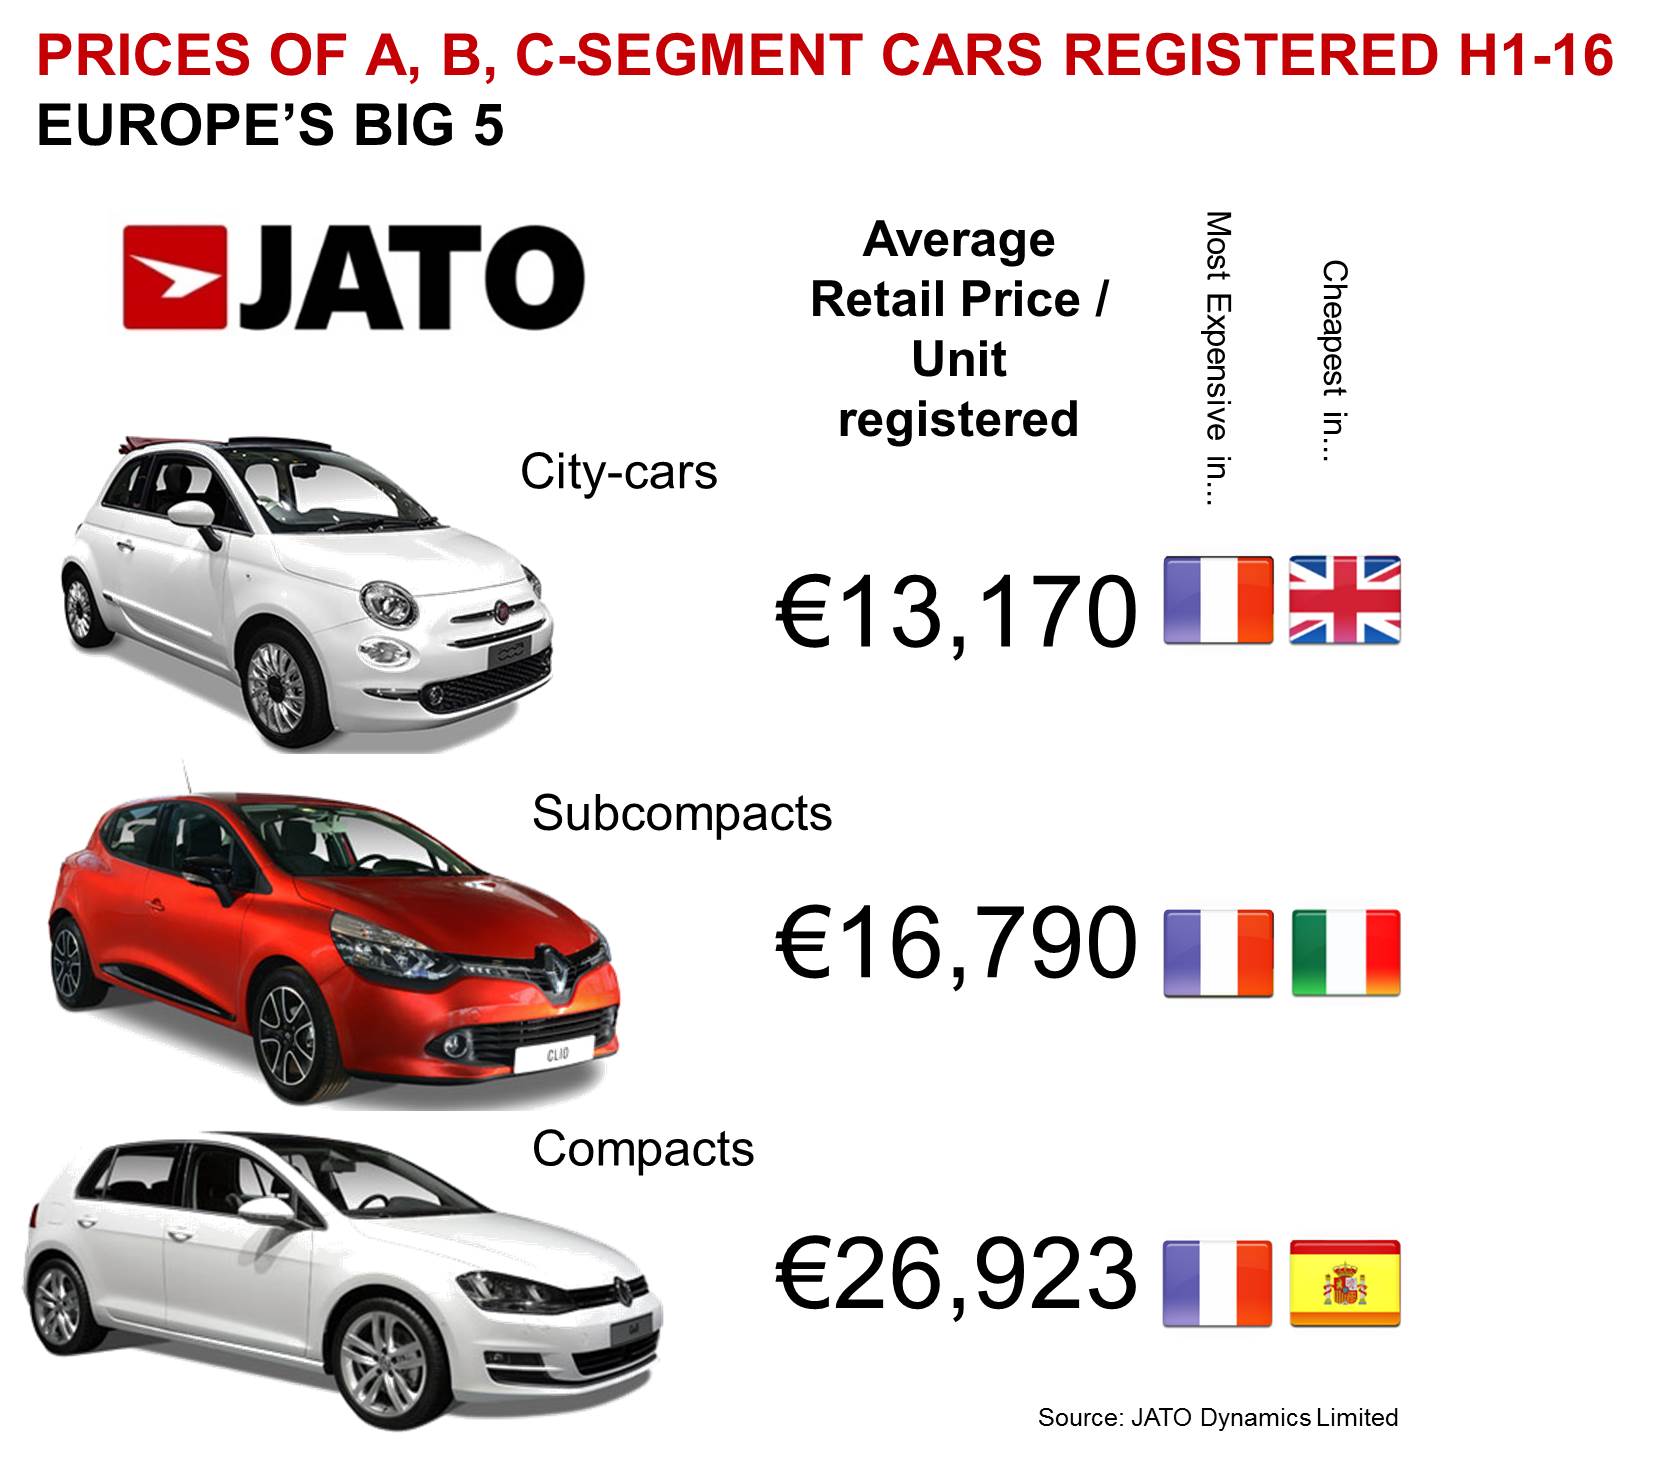 Small &  Compact cars average retail price at â¬20,000/unit ...